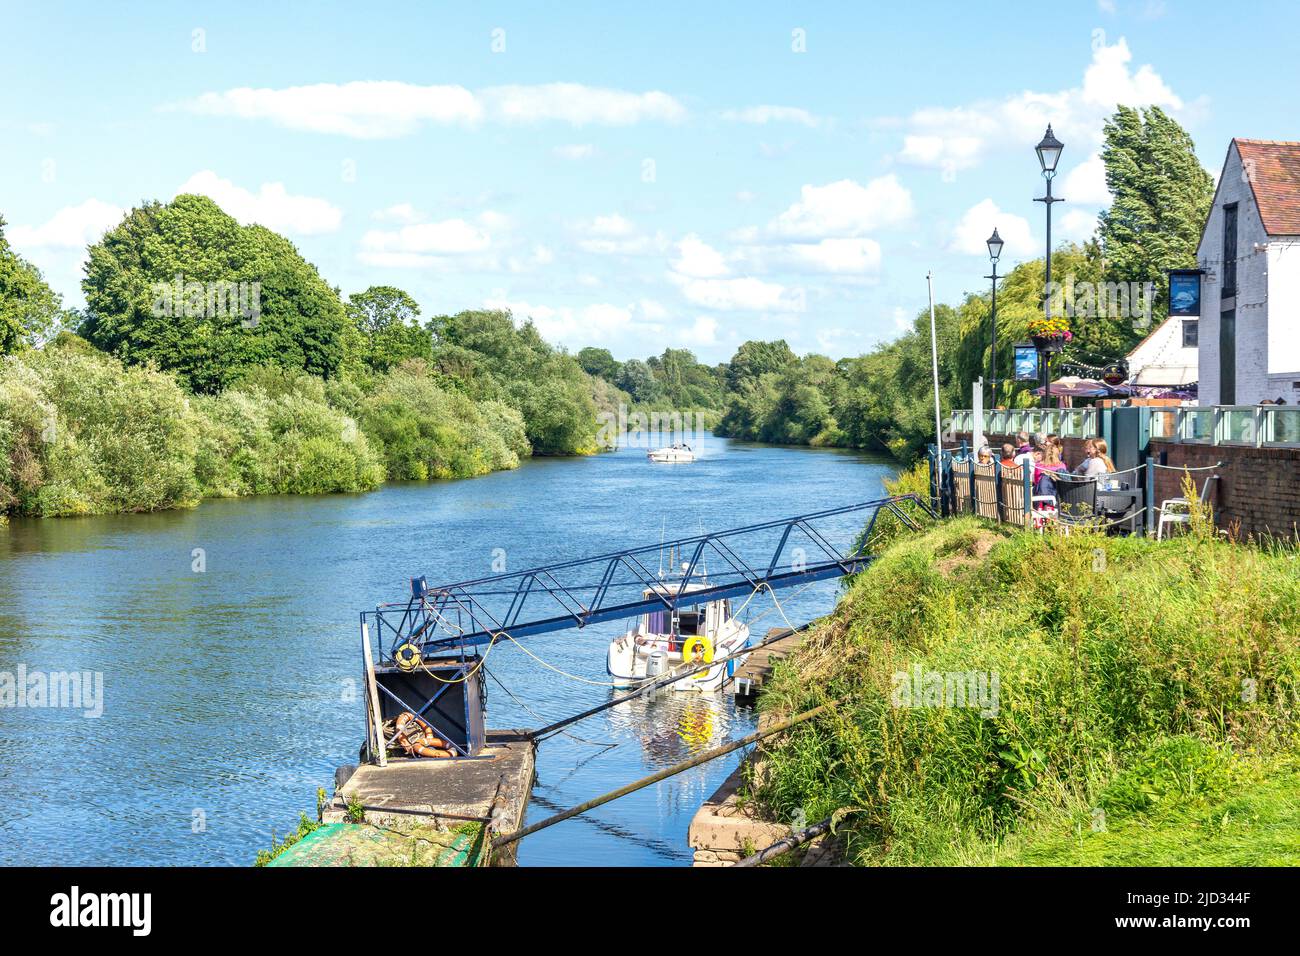 The River Severn at Riverside, Upton-upon-Severn, Worcestershire, Angleterre, Royaume-Uni Banque D'Images